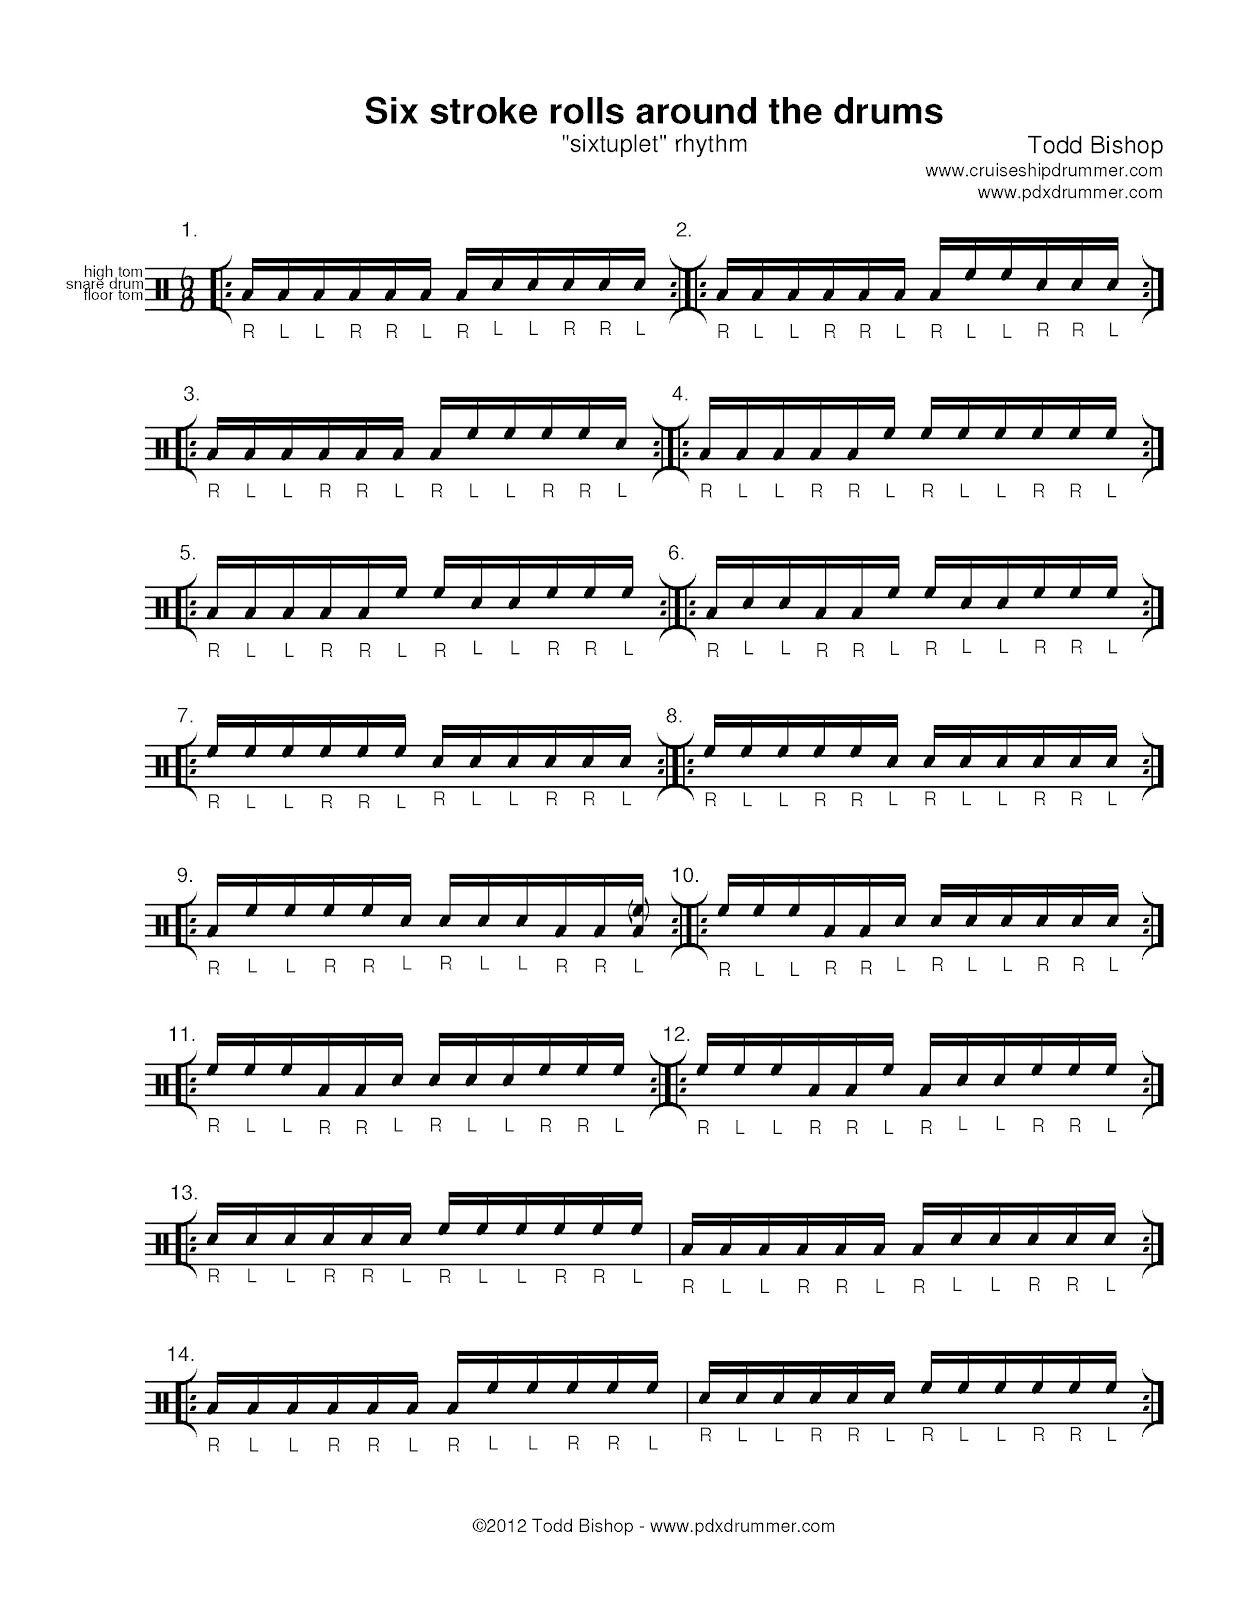 How to write drum notation in finale